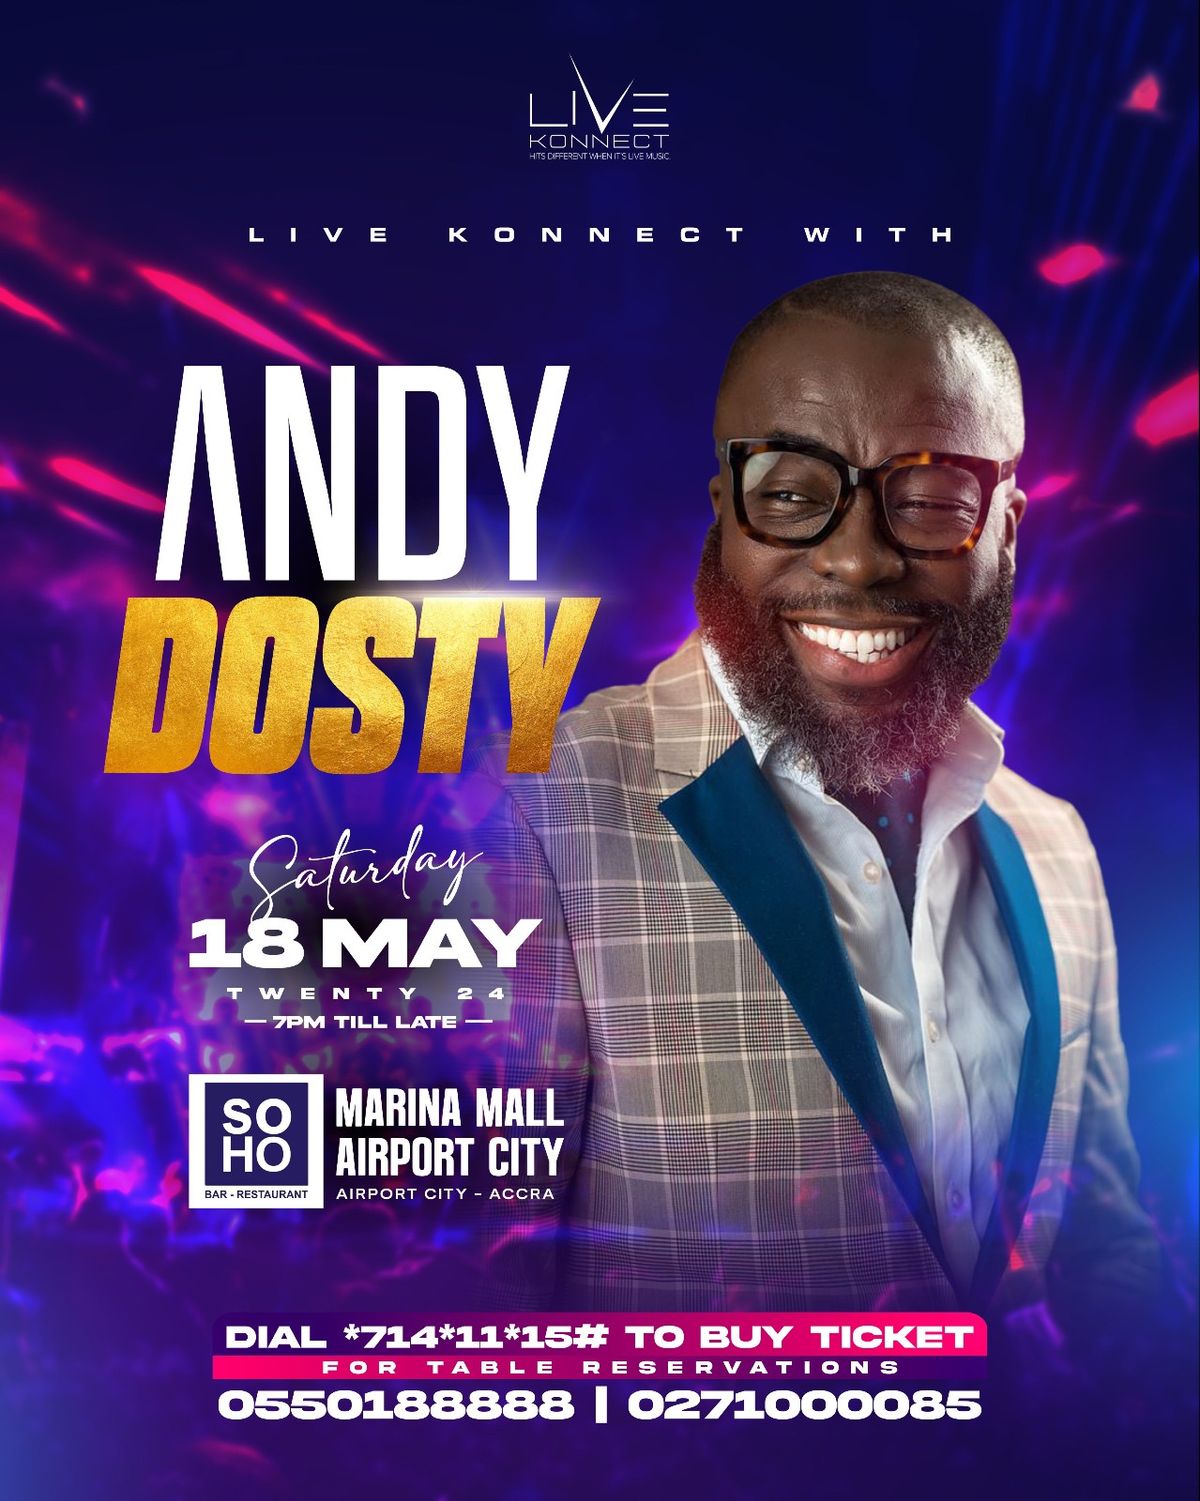 LIVE KONNECT WITH ANDY DOSTY